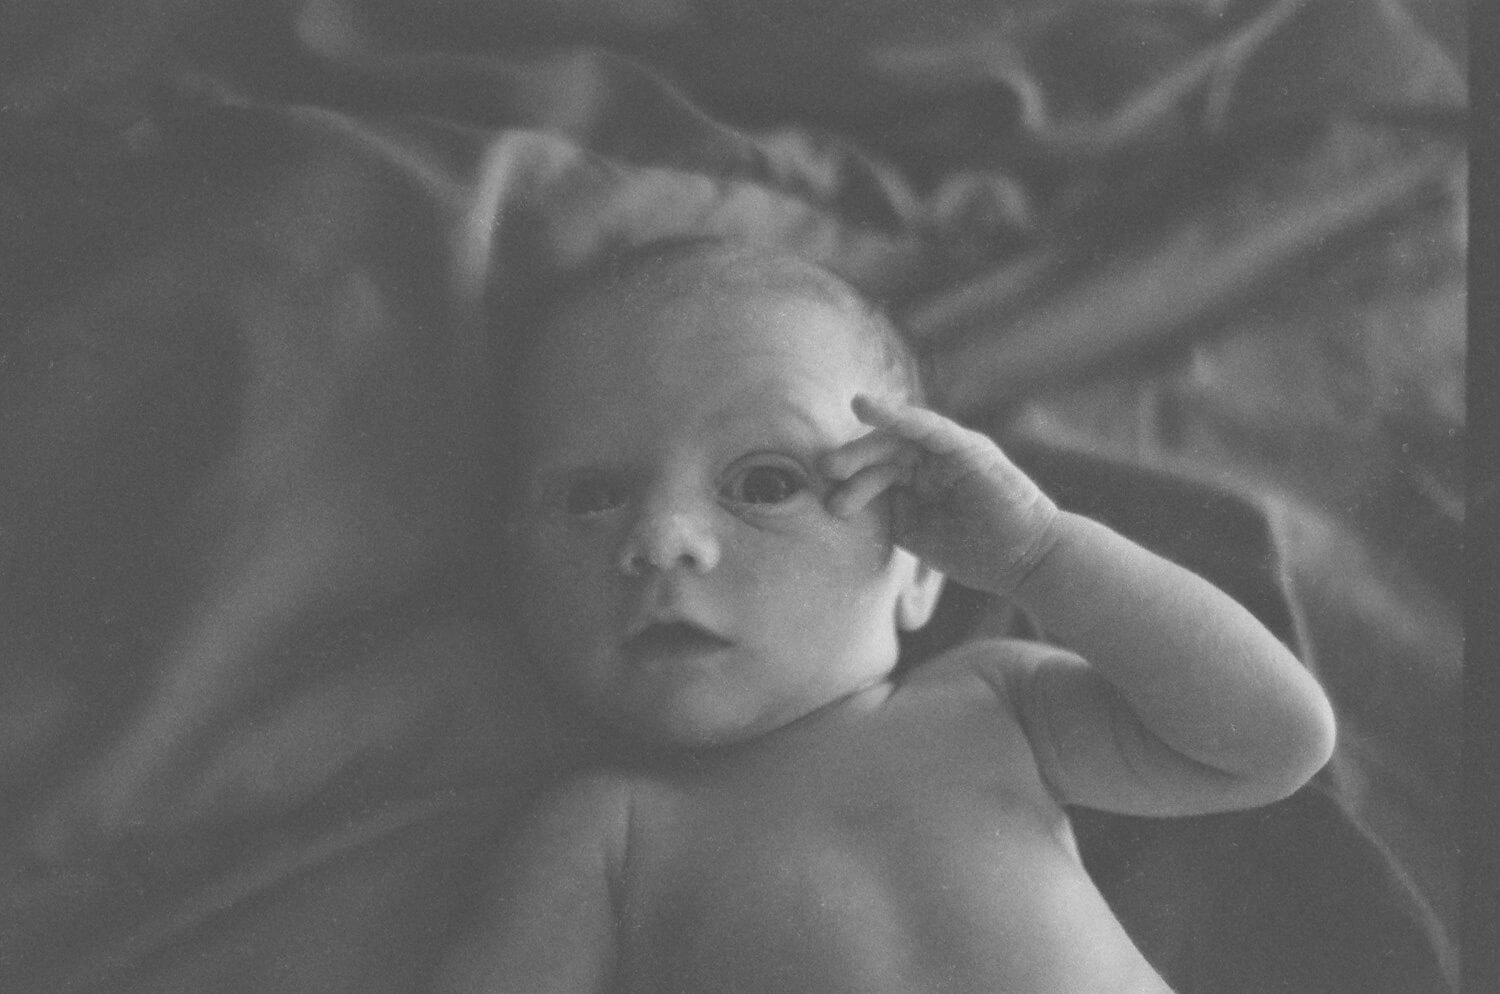 8 Frames... Of my newborn son on ILFORD HP5 PLUS (35mm Format / Nikon Nikkormat / Nikkor 50mm f/1.4 AI-S) - by Spencer Cameron 